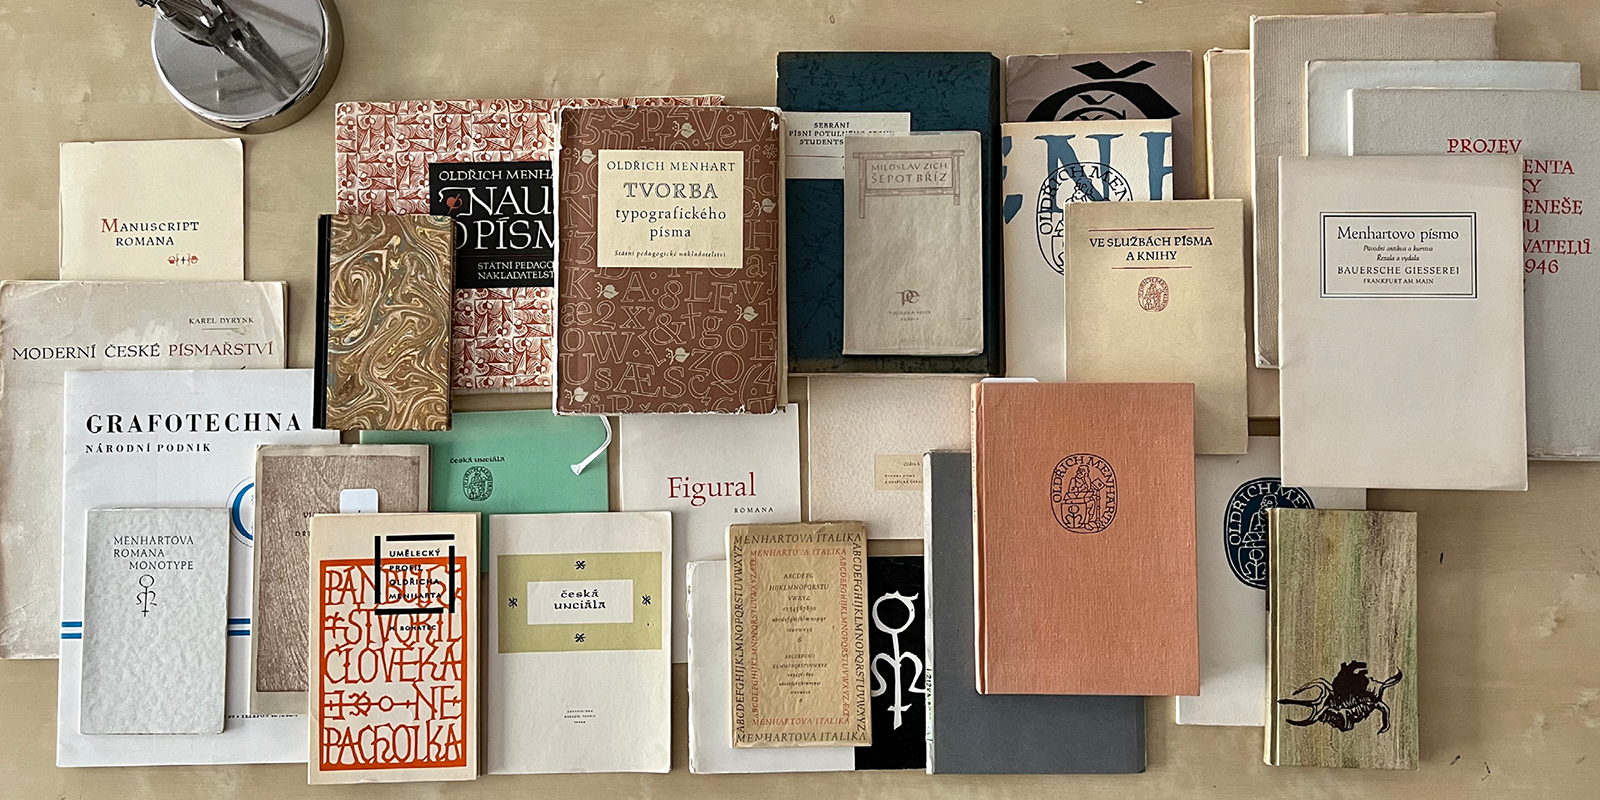 Collecting specimens, rare prints and bibliophilia is not only our passion, but also a prerequisite for the quality digitization of Oldřich Menhart‘s typefaces.